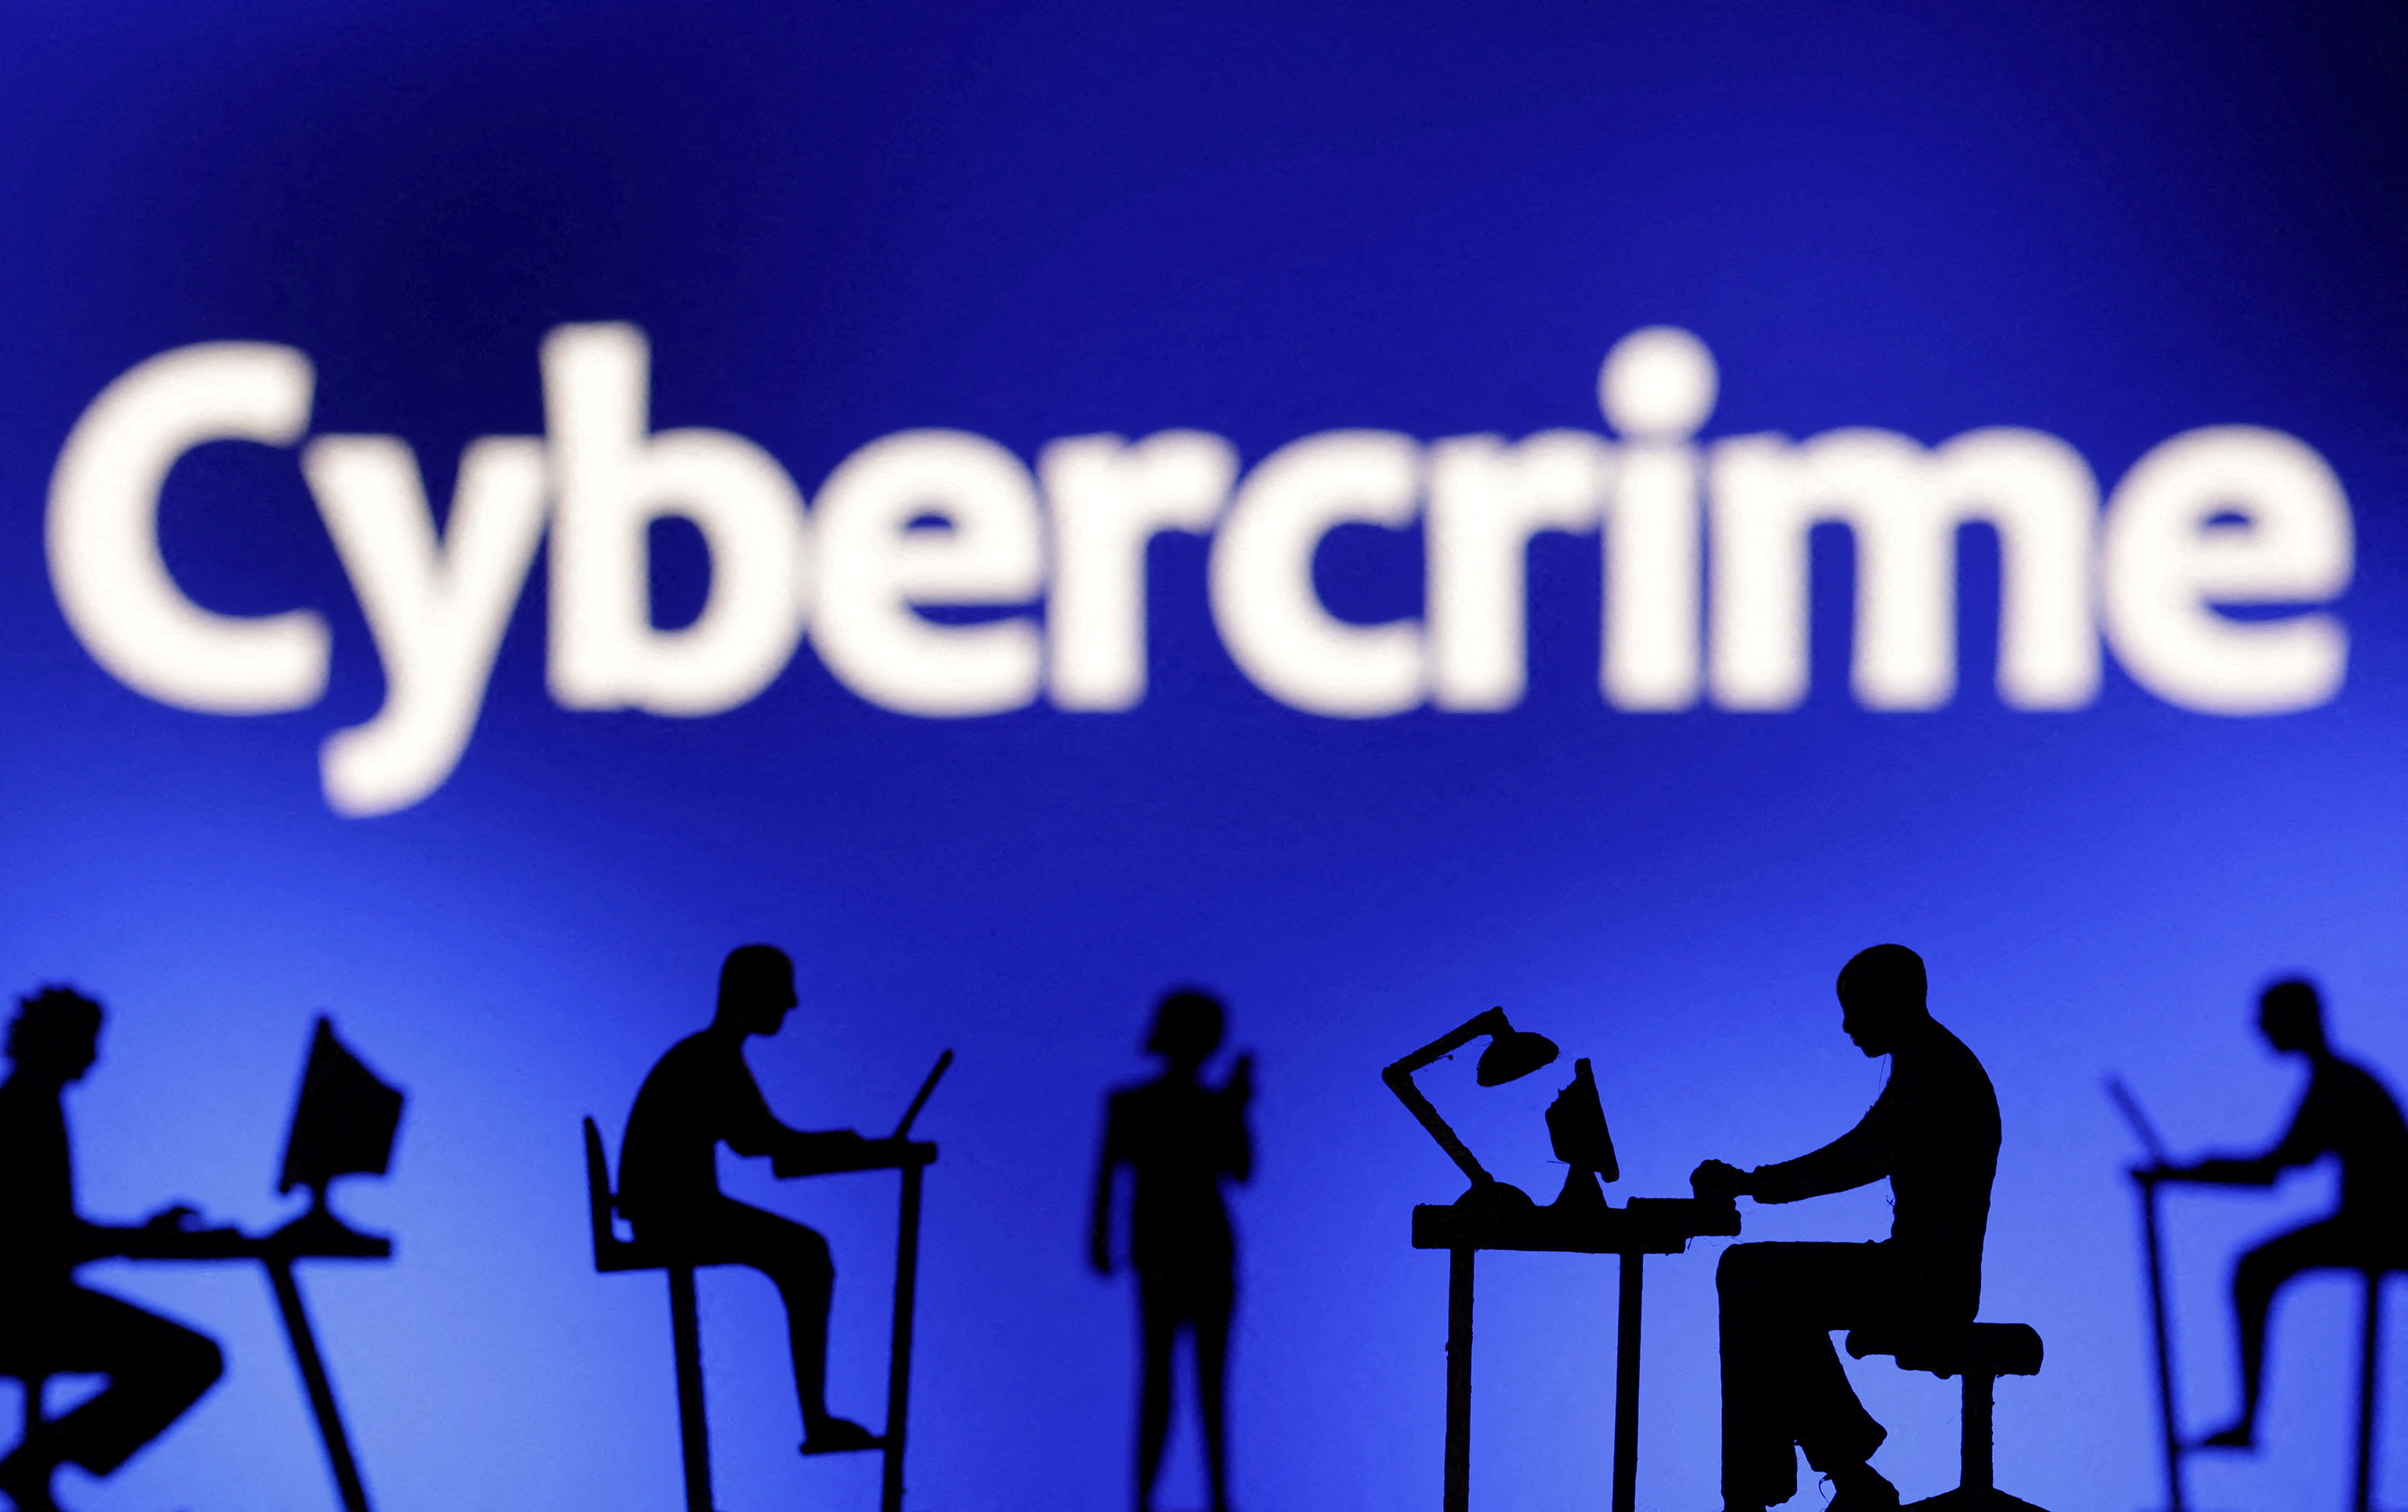 Illustration shows the word "Cybercrime\